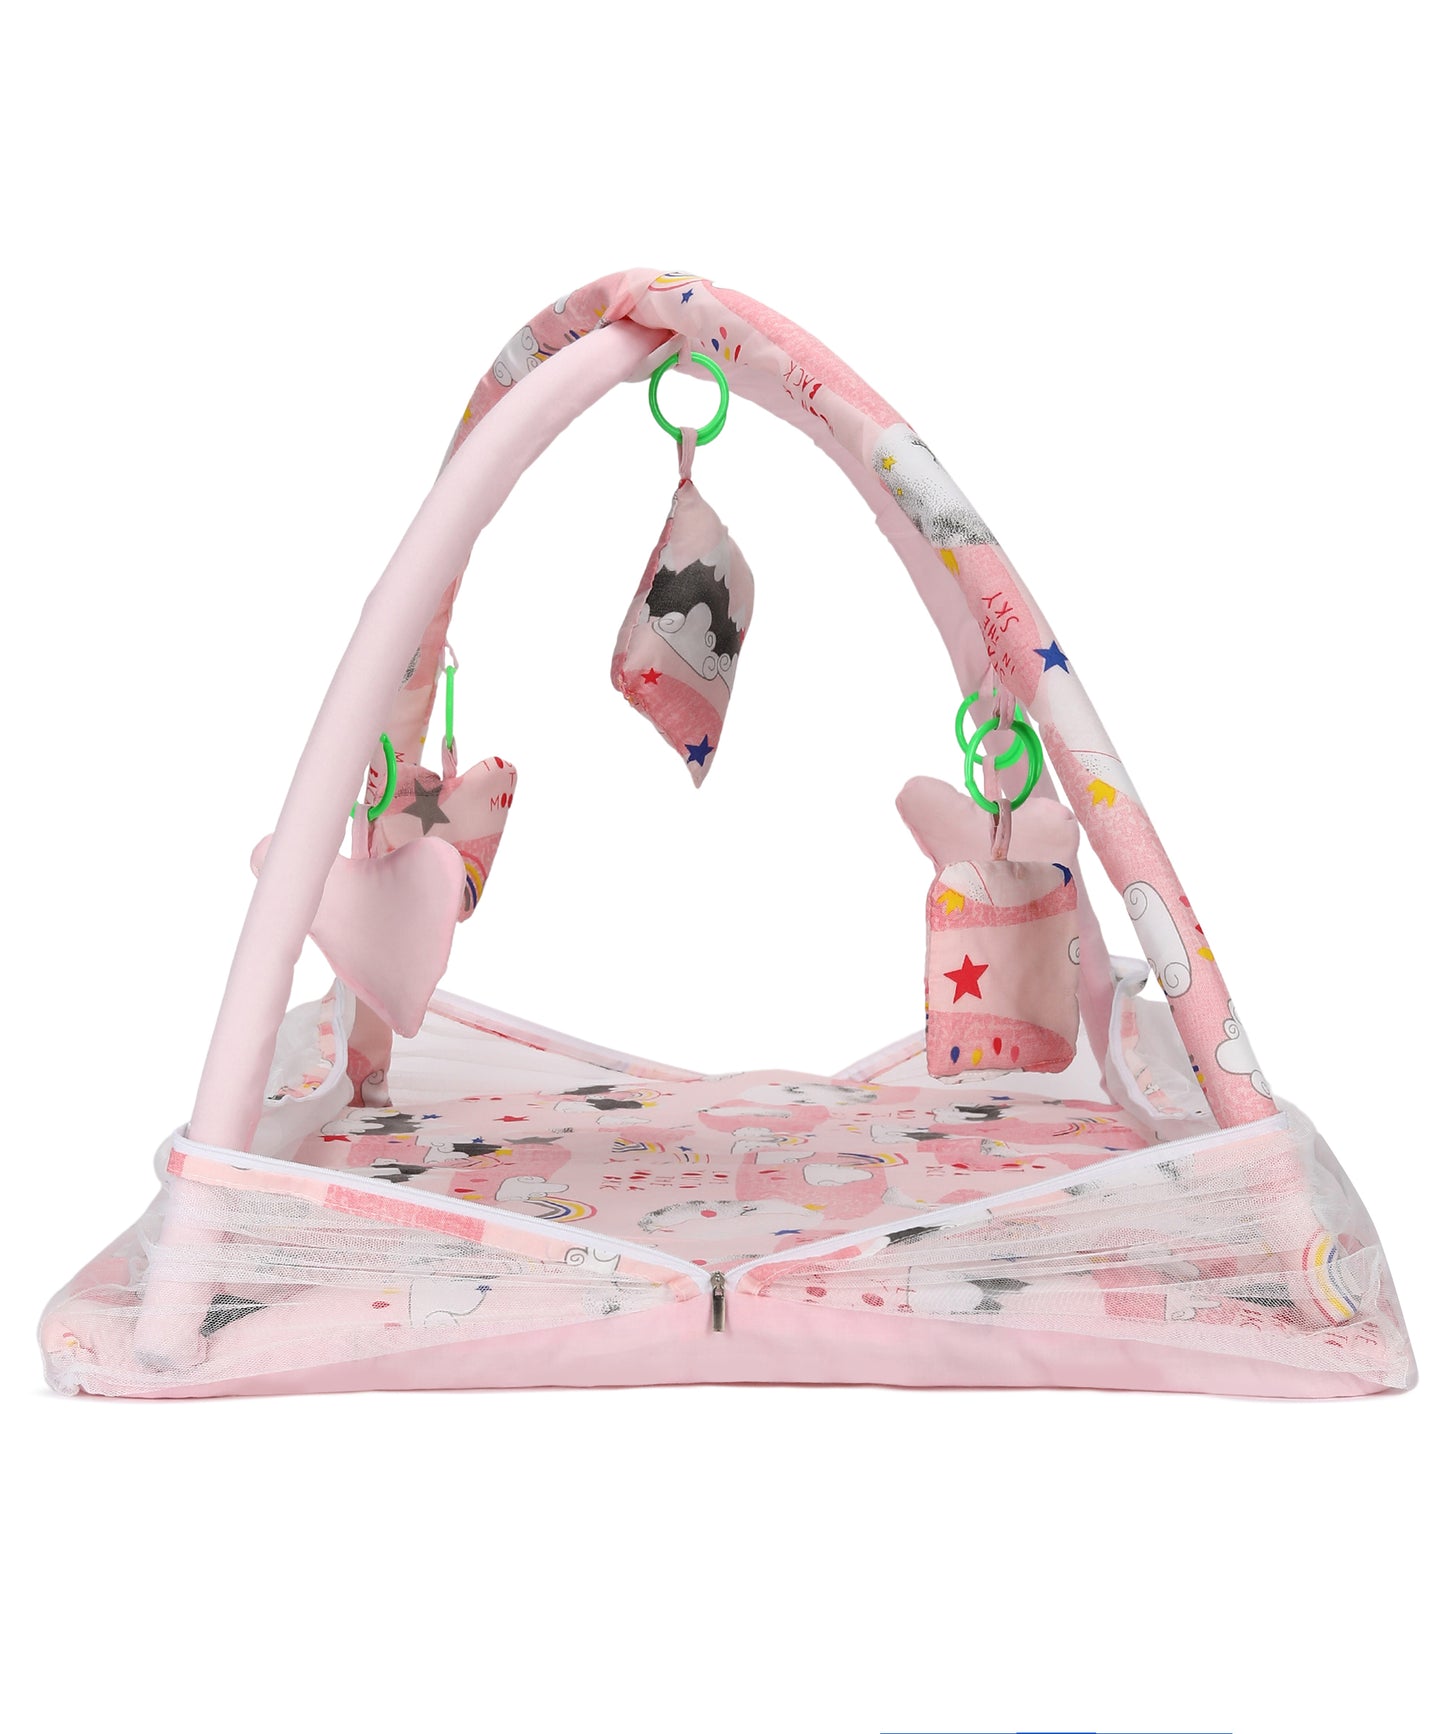 VParents Cloudy Baby Bedding Set Mattress with Mosquito Net Bed Set and Play Gym with Attached Soft Toys (0-12 Months)